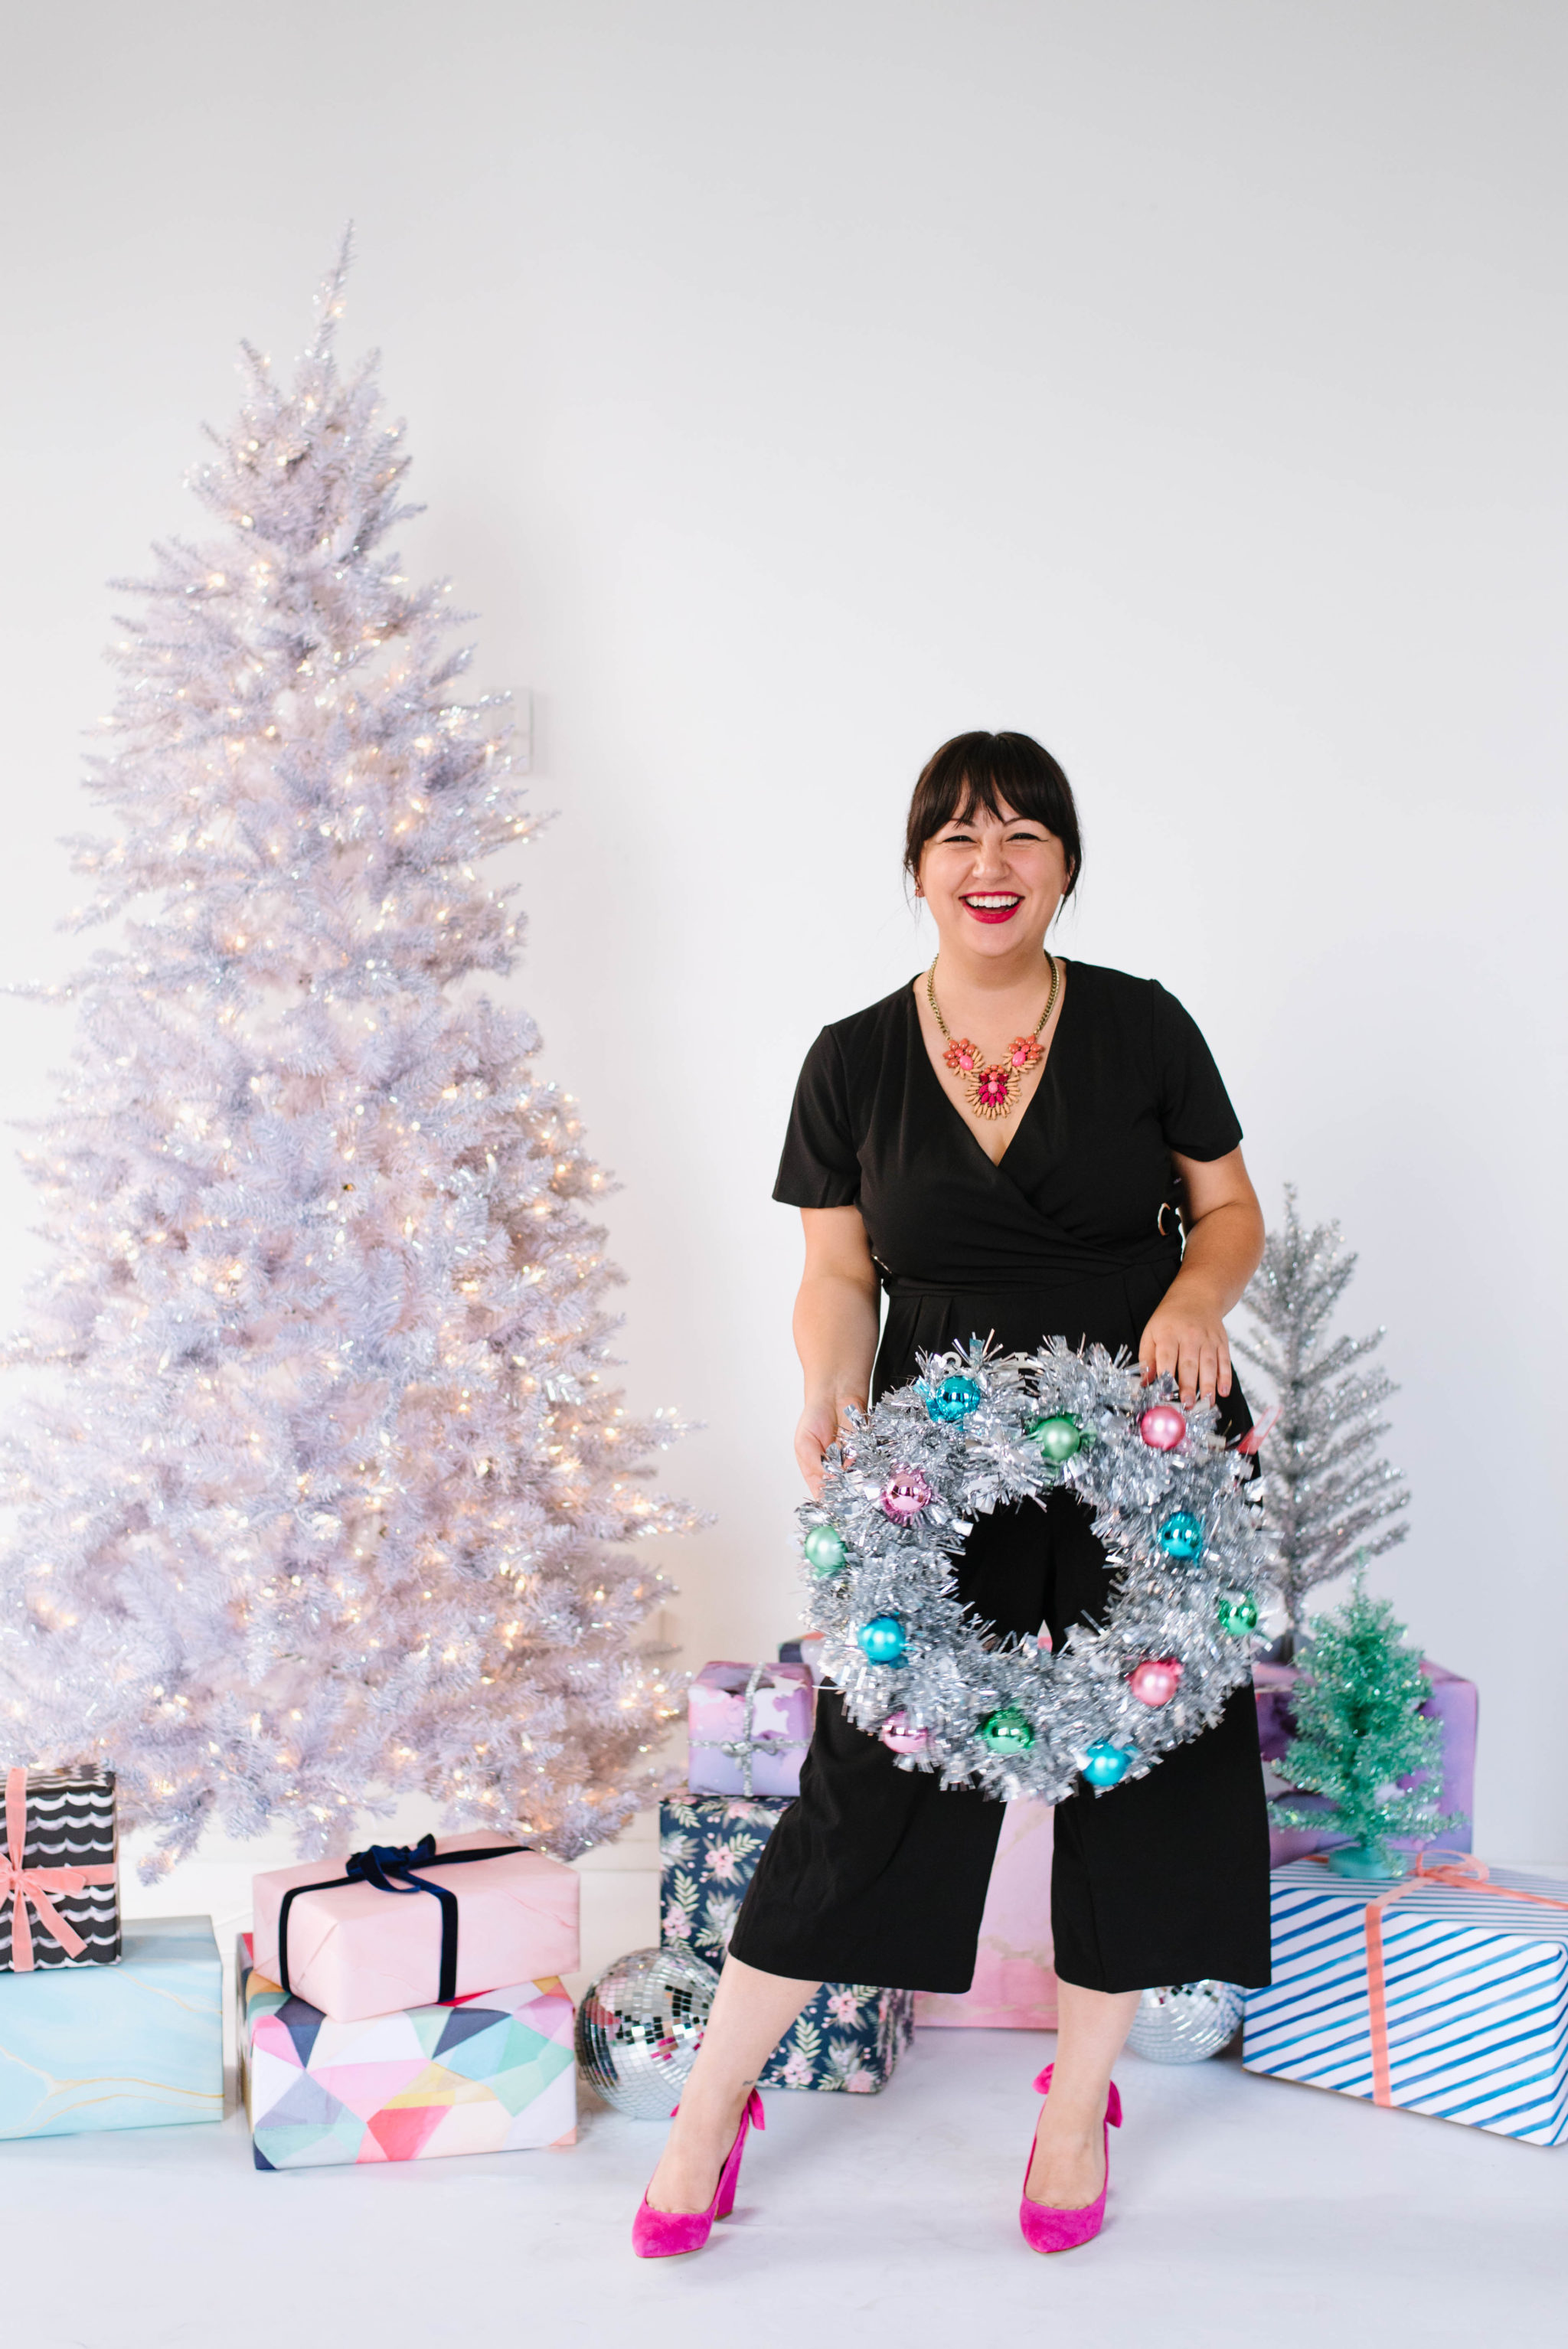 A woman wearing a black jumpsuit from Walmart with a statement necklace and hot pink heels in front of a white Christmas tree and a pile of wrapped Christmas presents